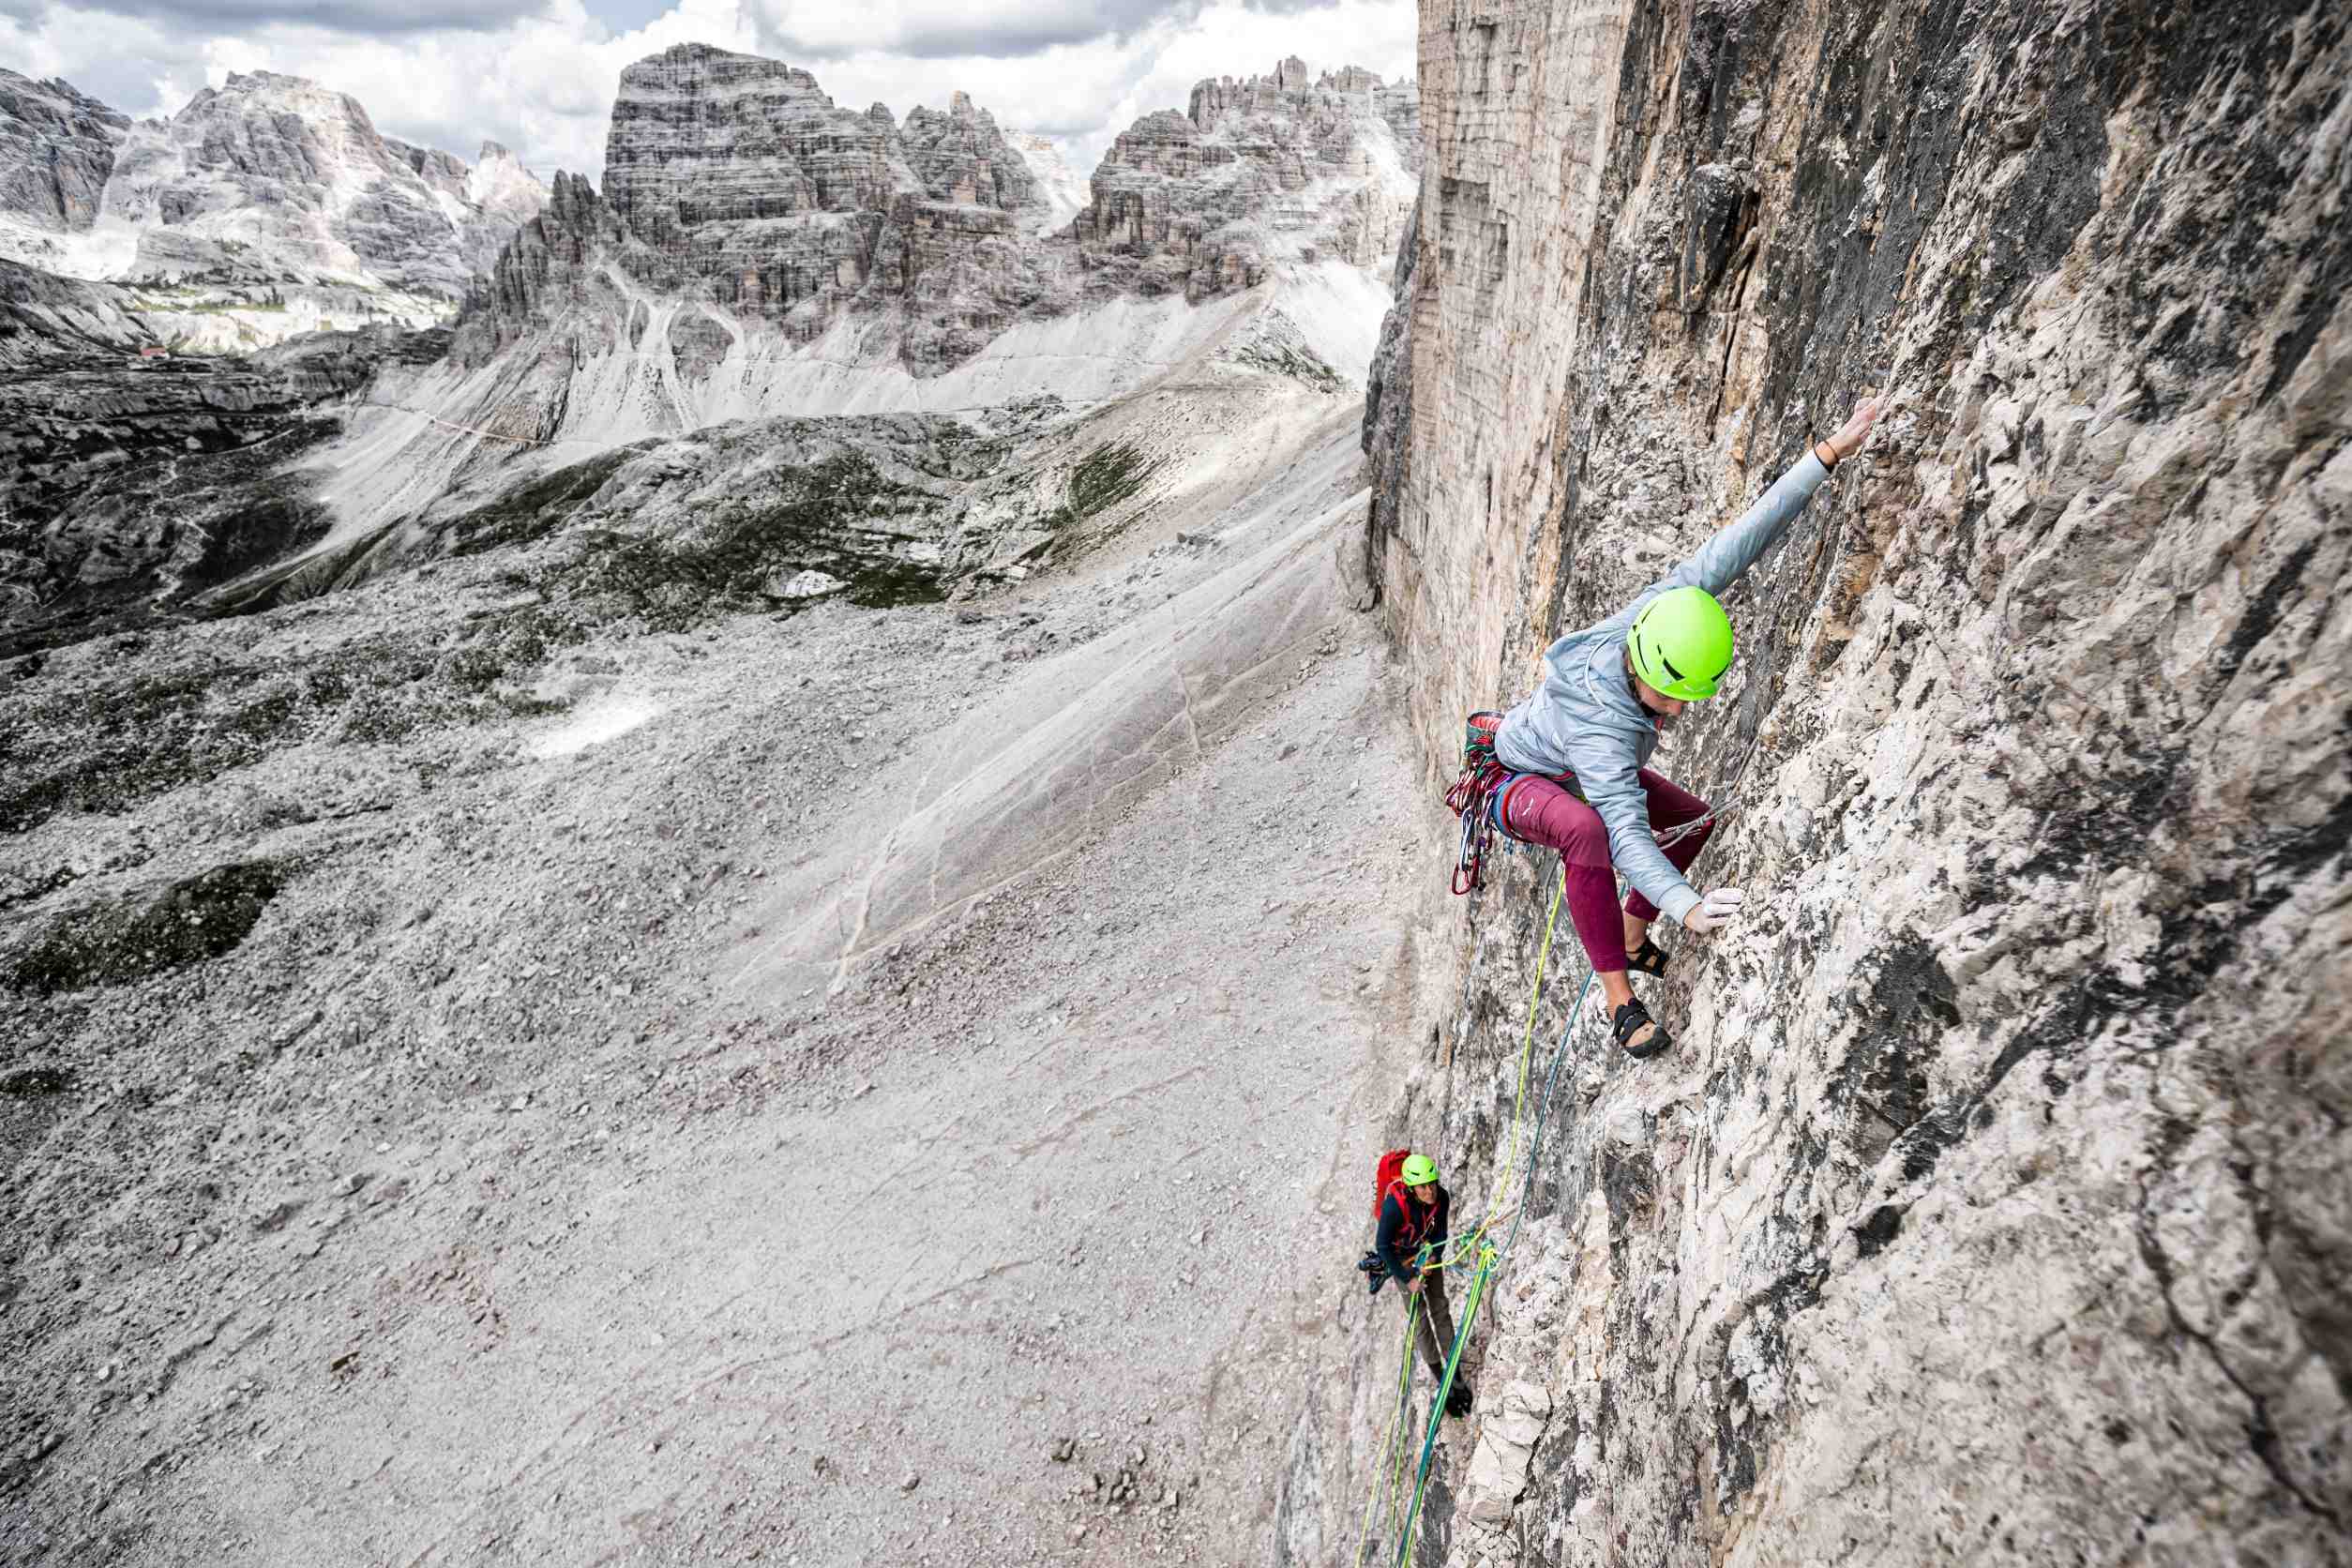 Eline Le Menestrel: 'I could have died but I also could have enjoyed a beautiful day climbing "the Fish"'.